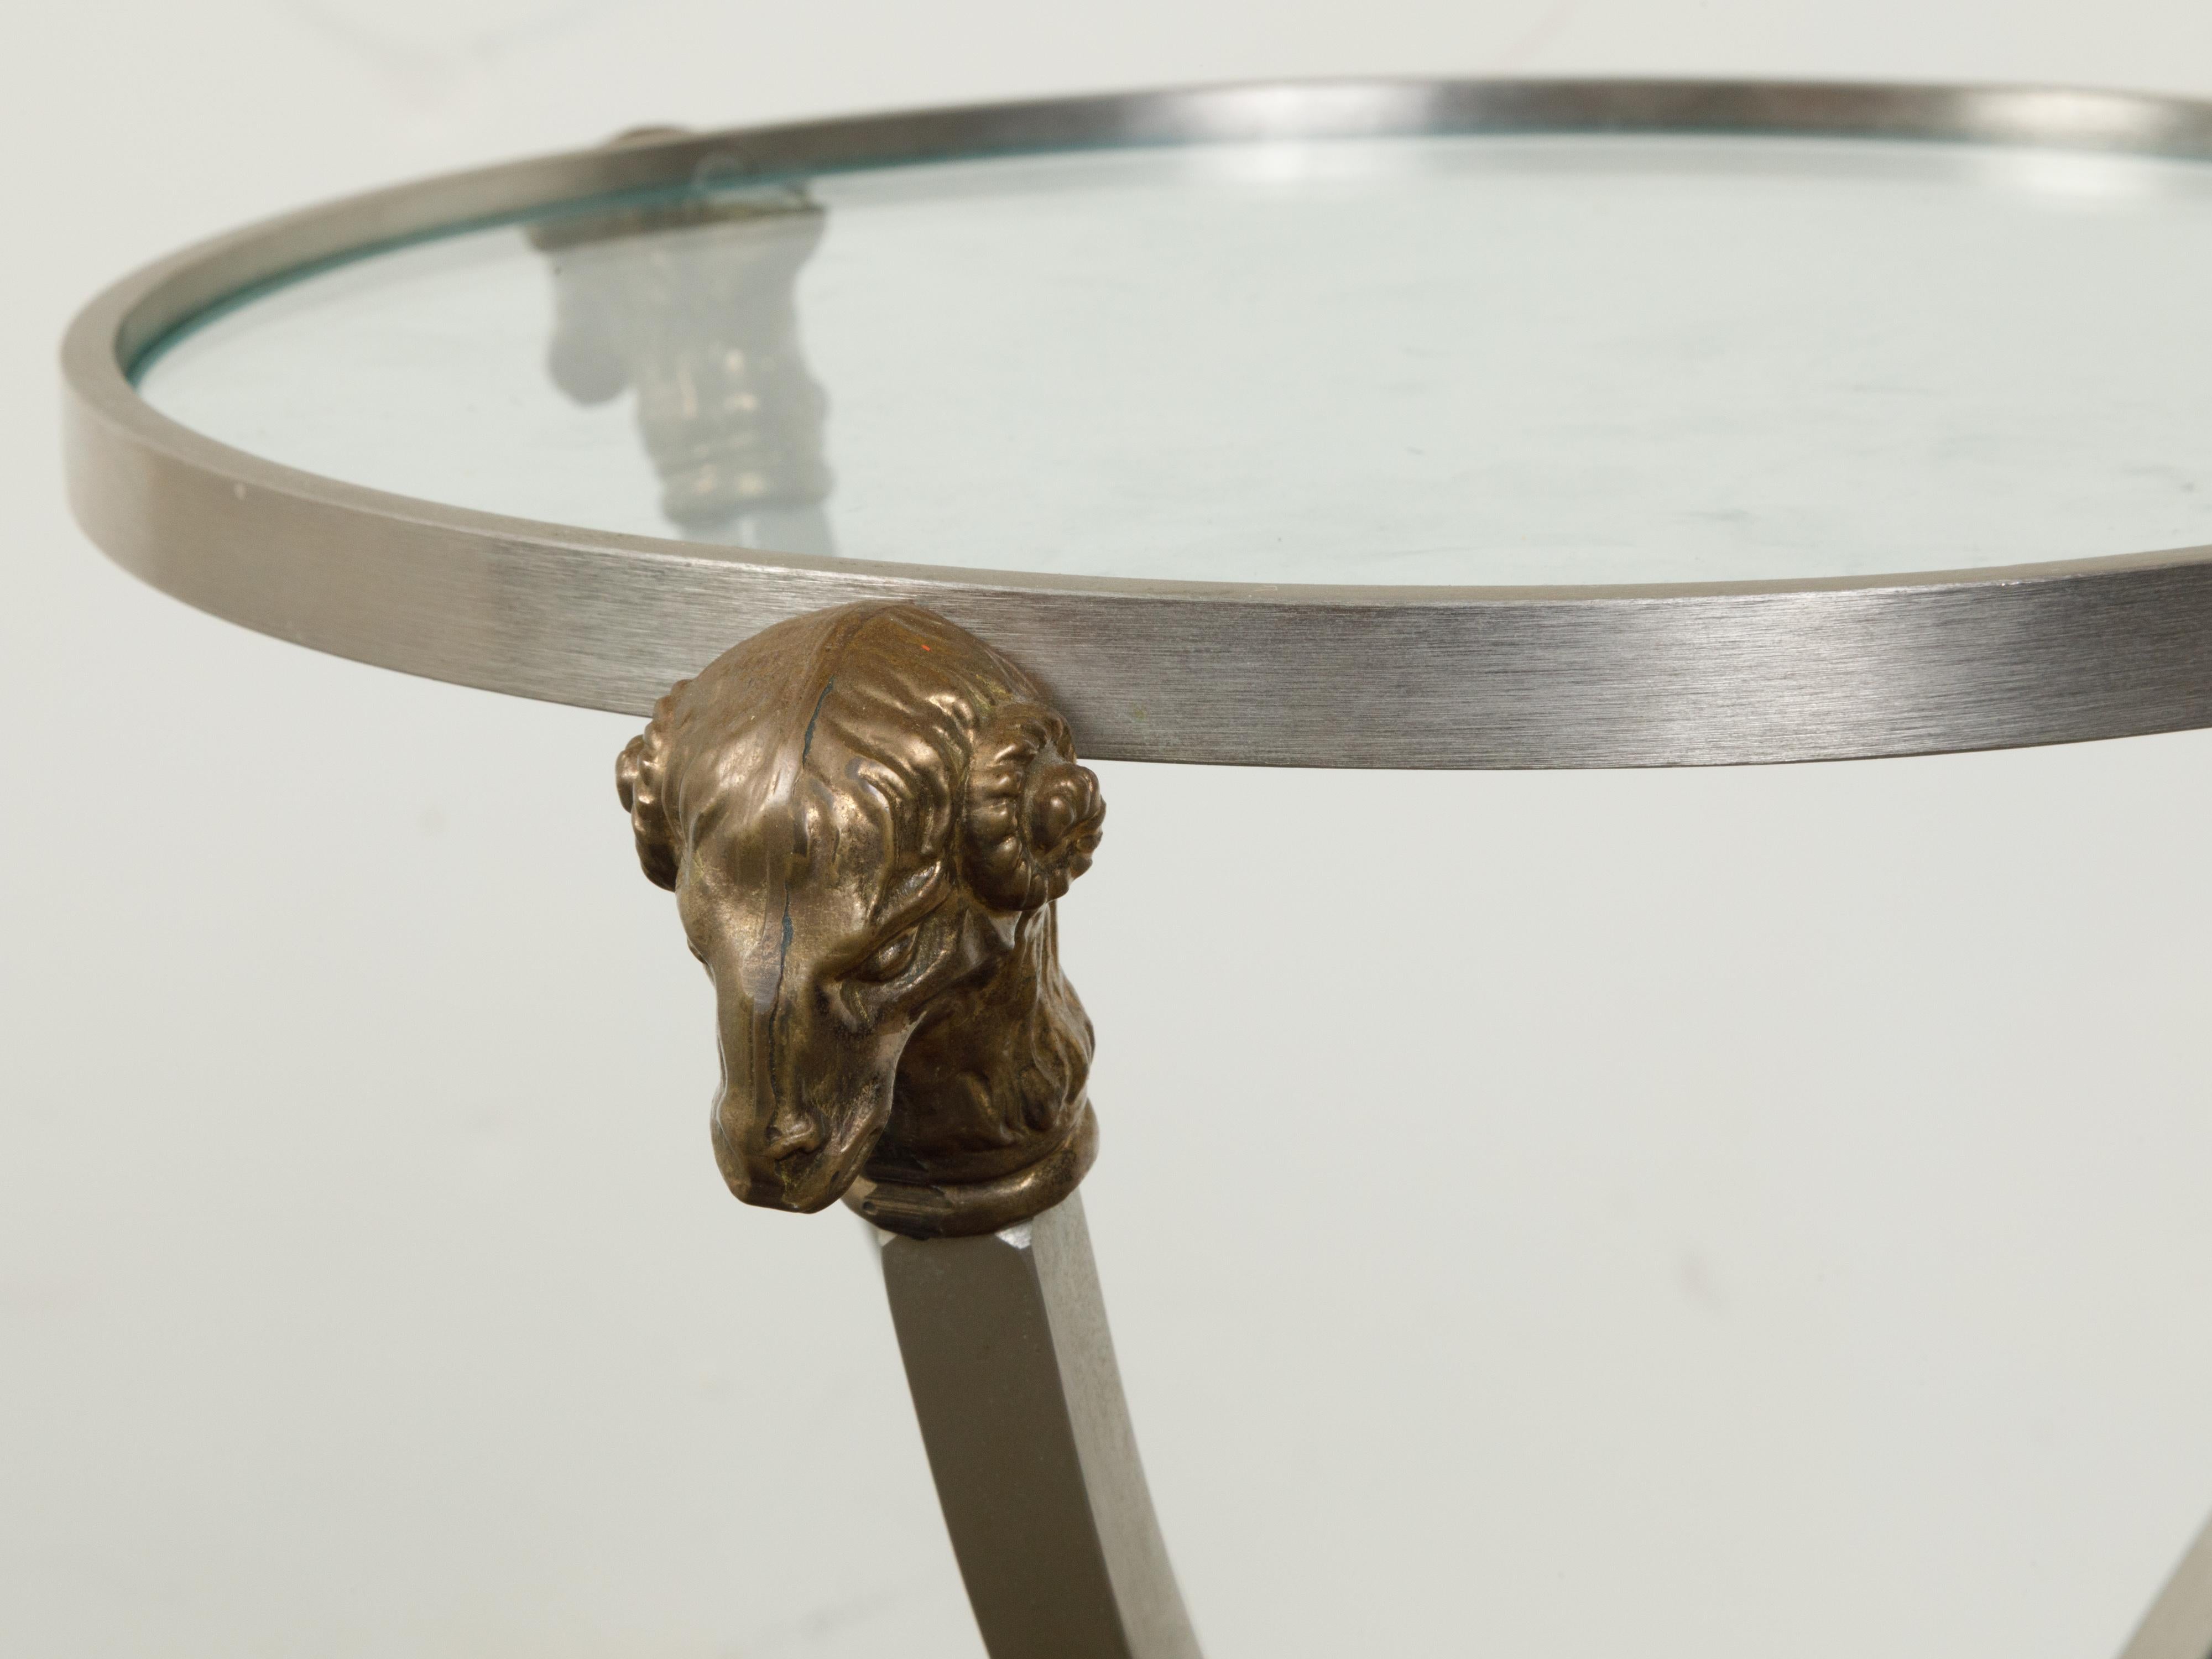 Brass Italian Midcentury Directoire Style Side Table with Rams' Heads and Hoof Feet